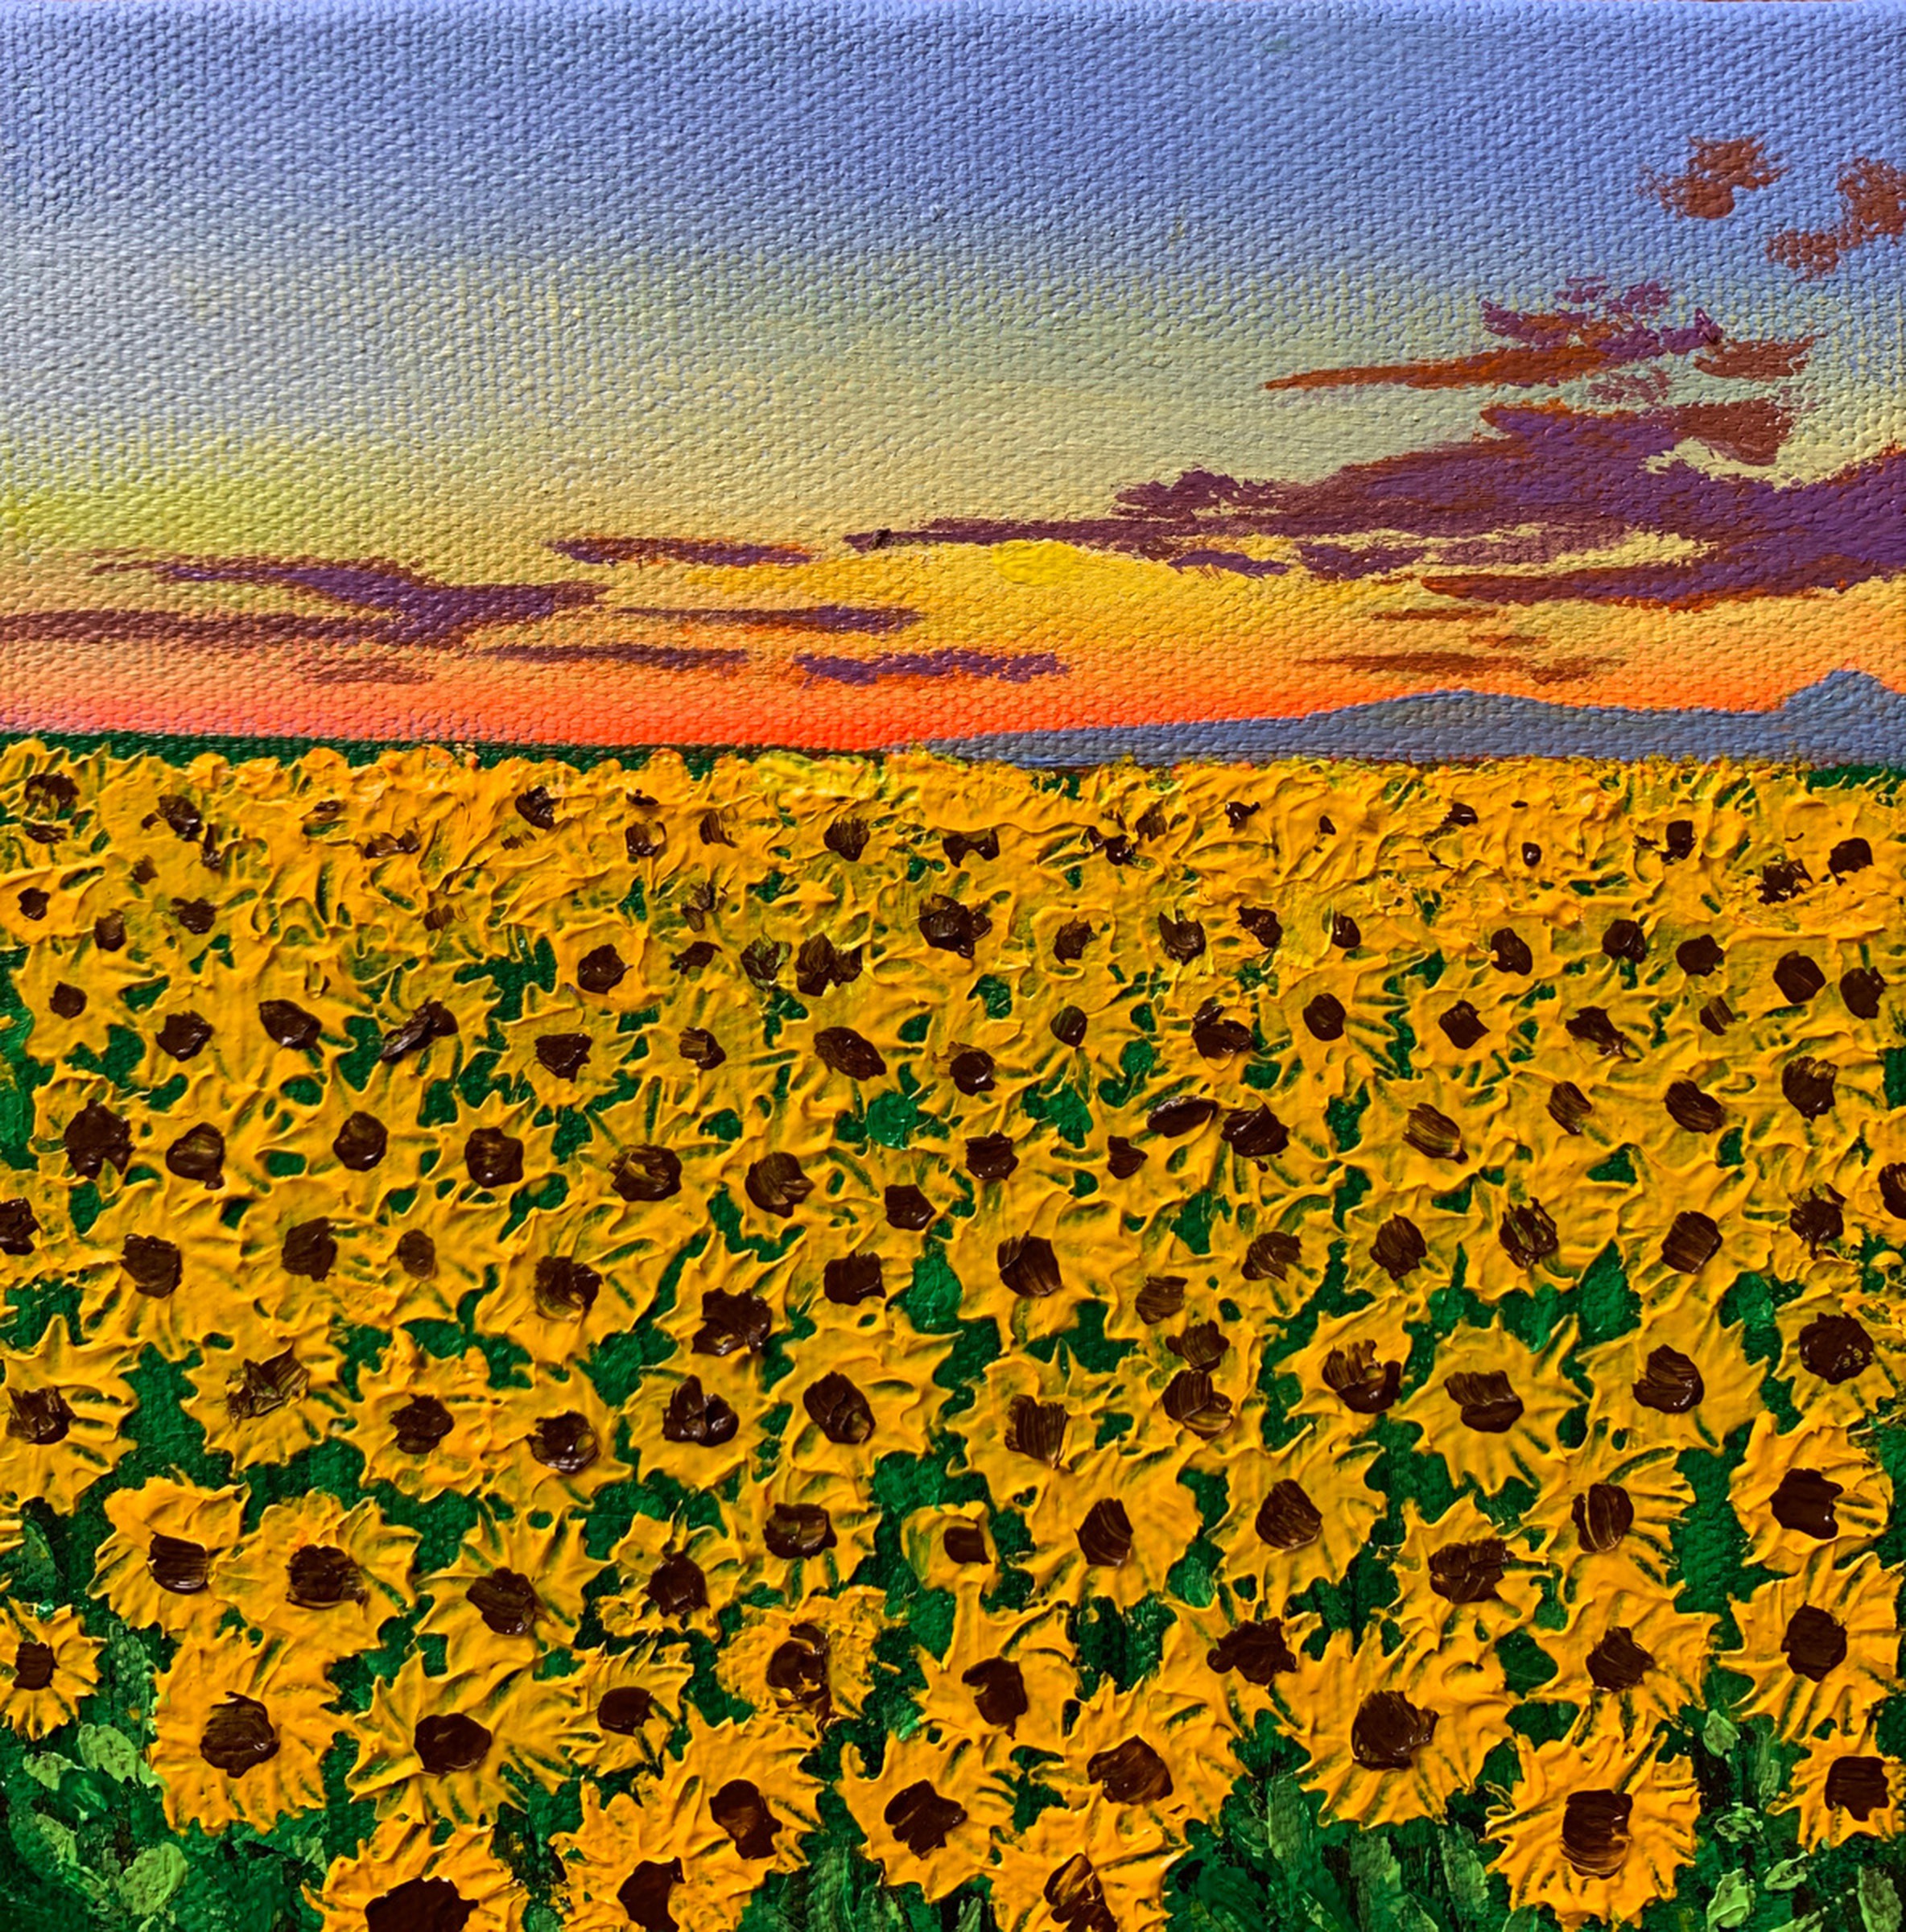 Sunflower Field At Sunset Small Painting Re Artfinder